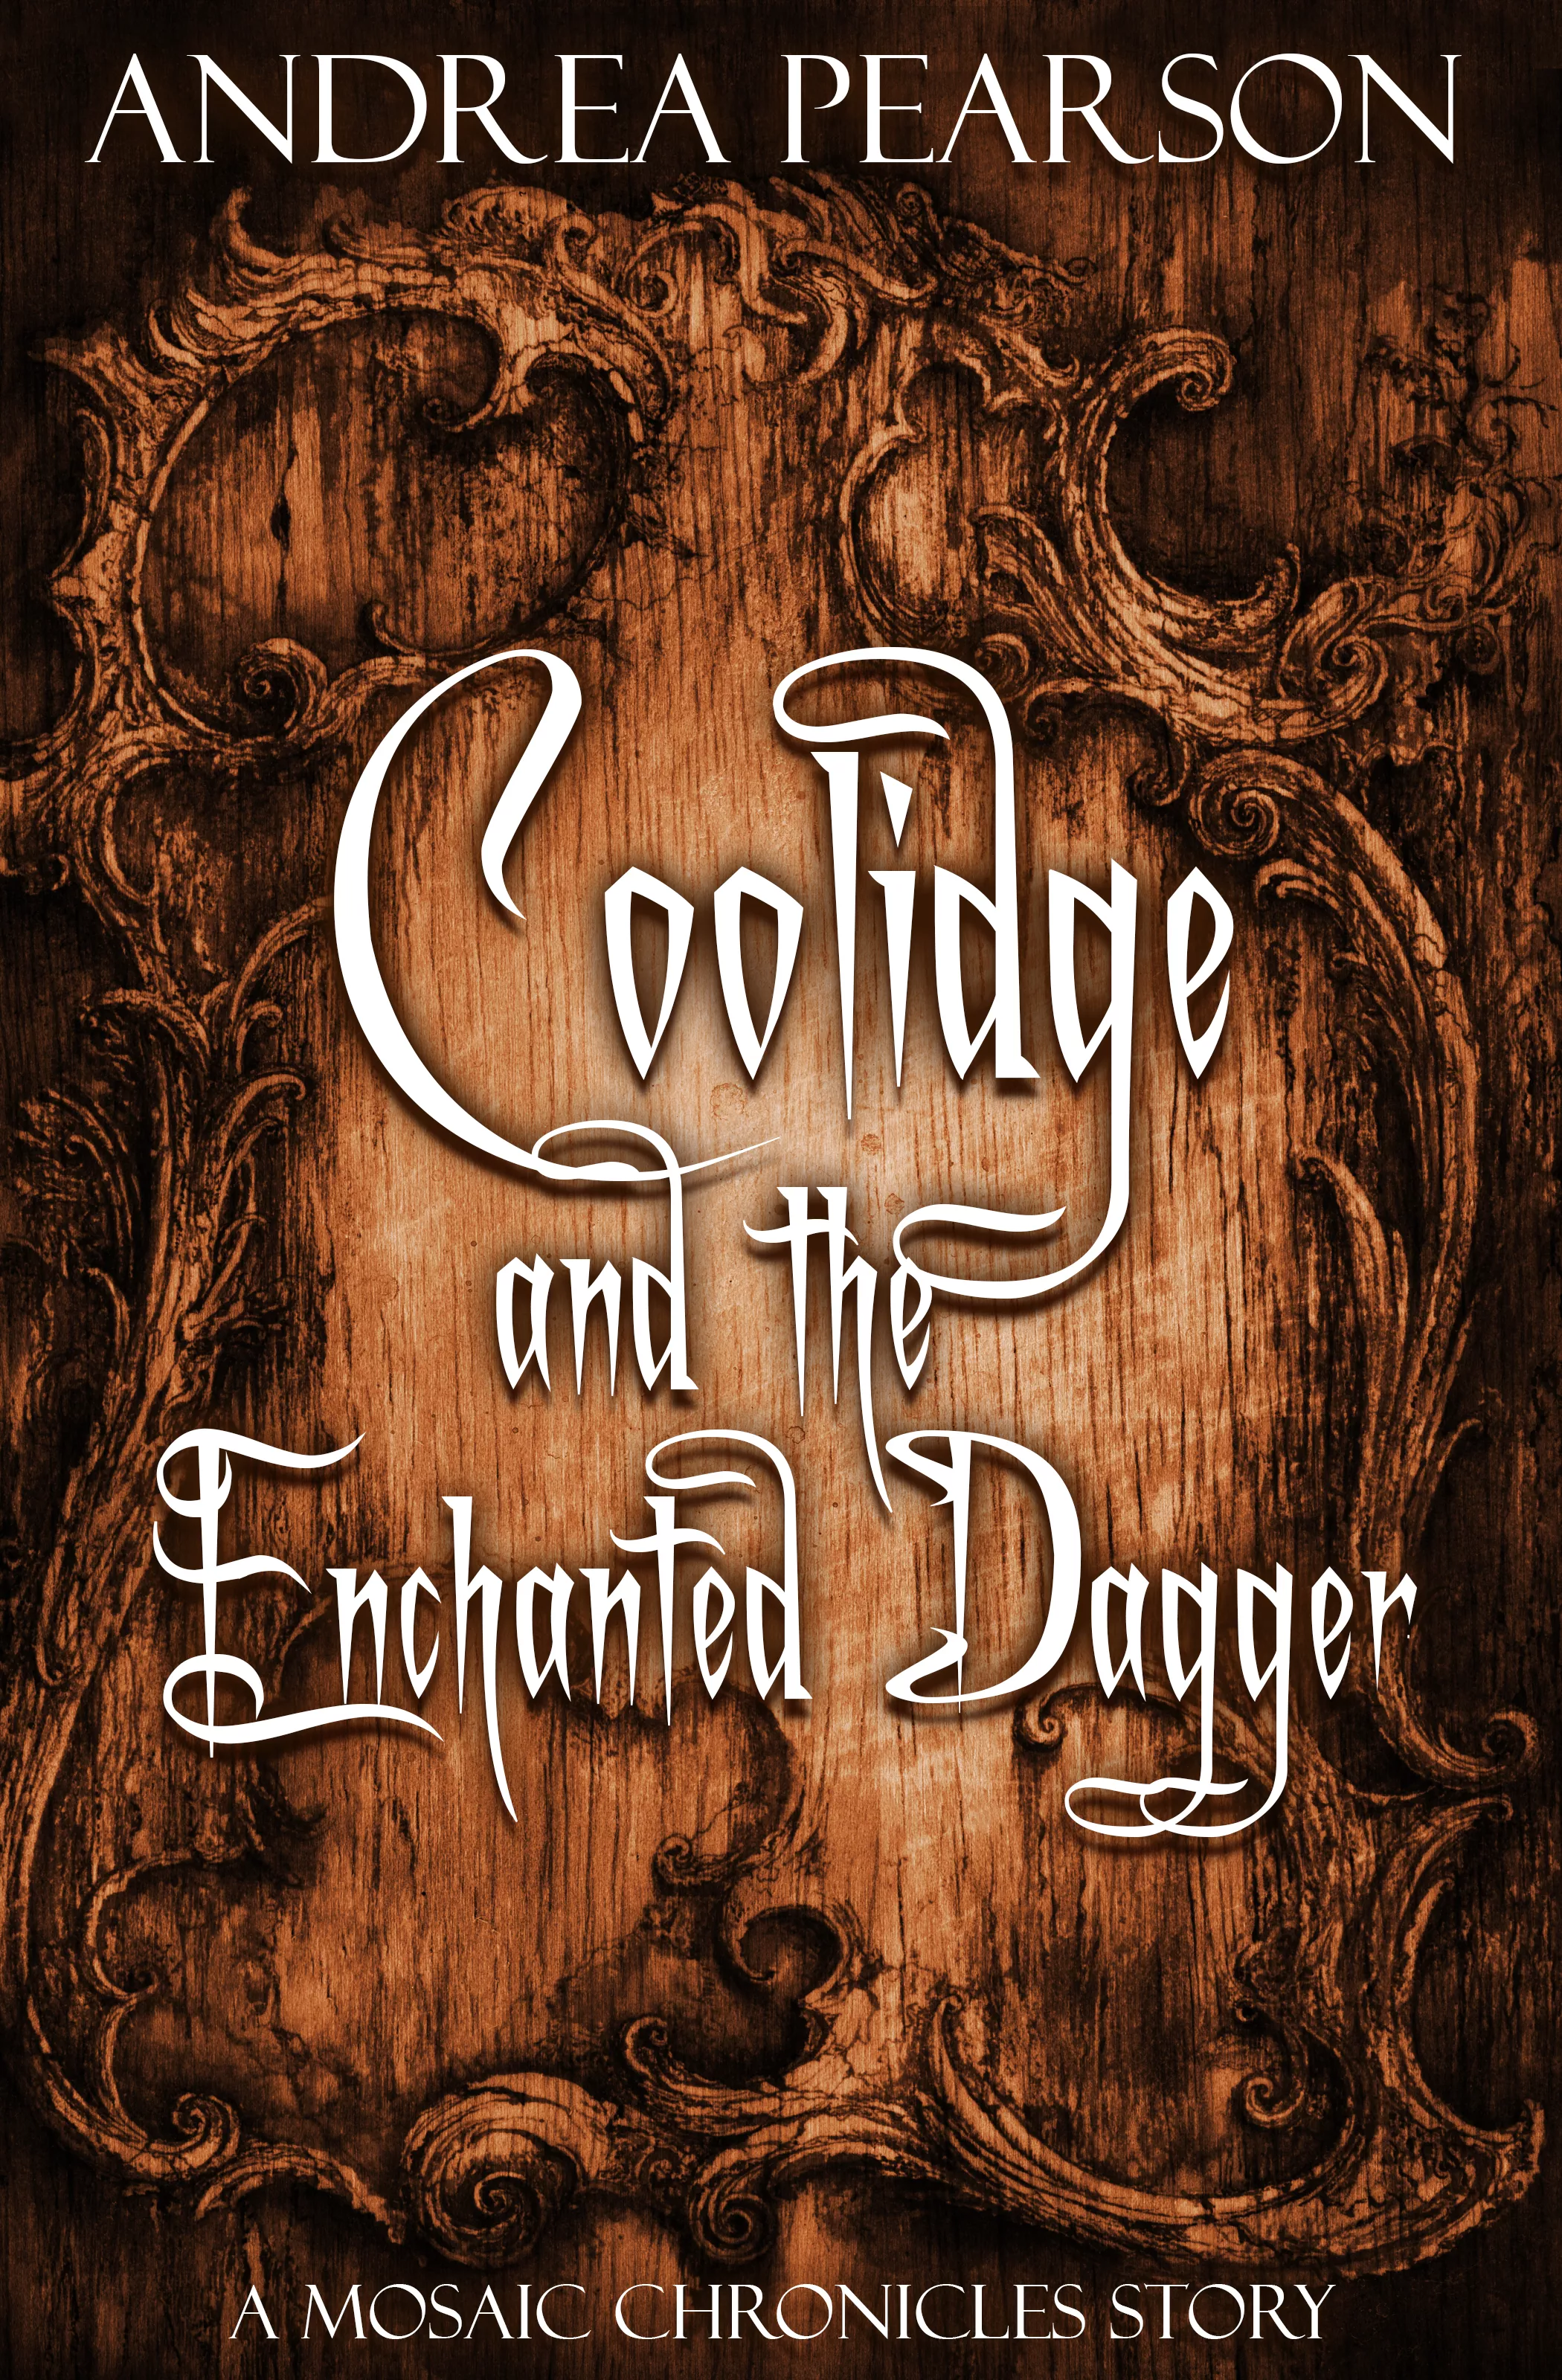 Coolidge and the Enchanted Dagger